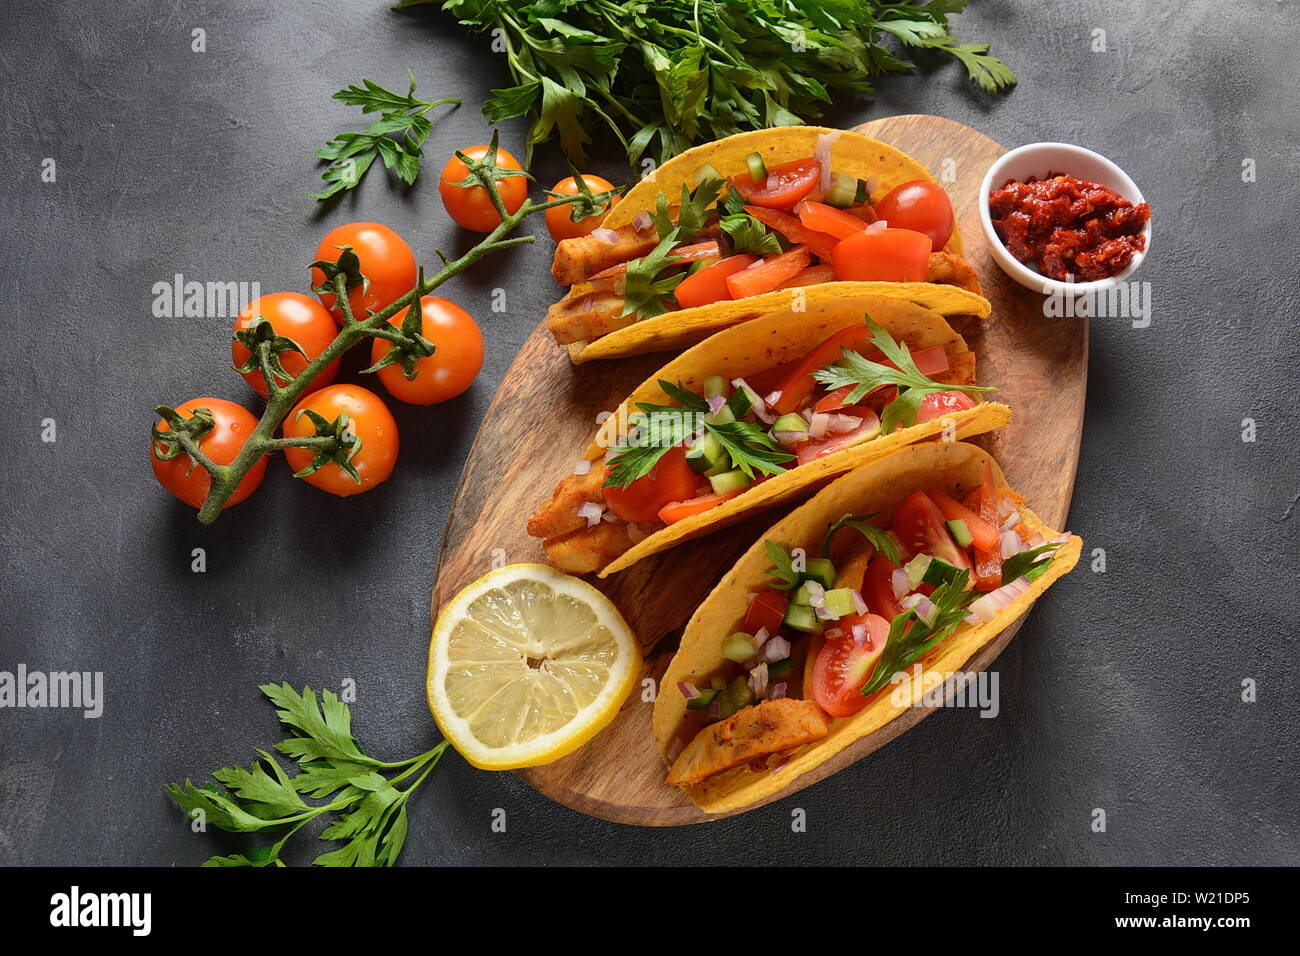 Tacos with grilled chicken and vegetables - Mexican food style Stock Photo  - Alamy